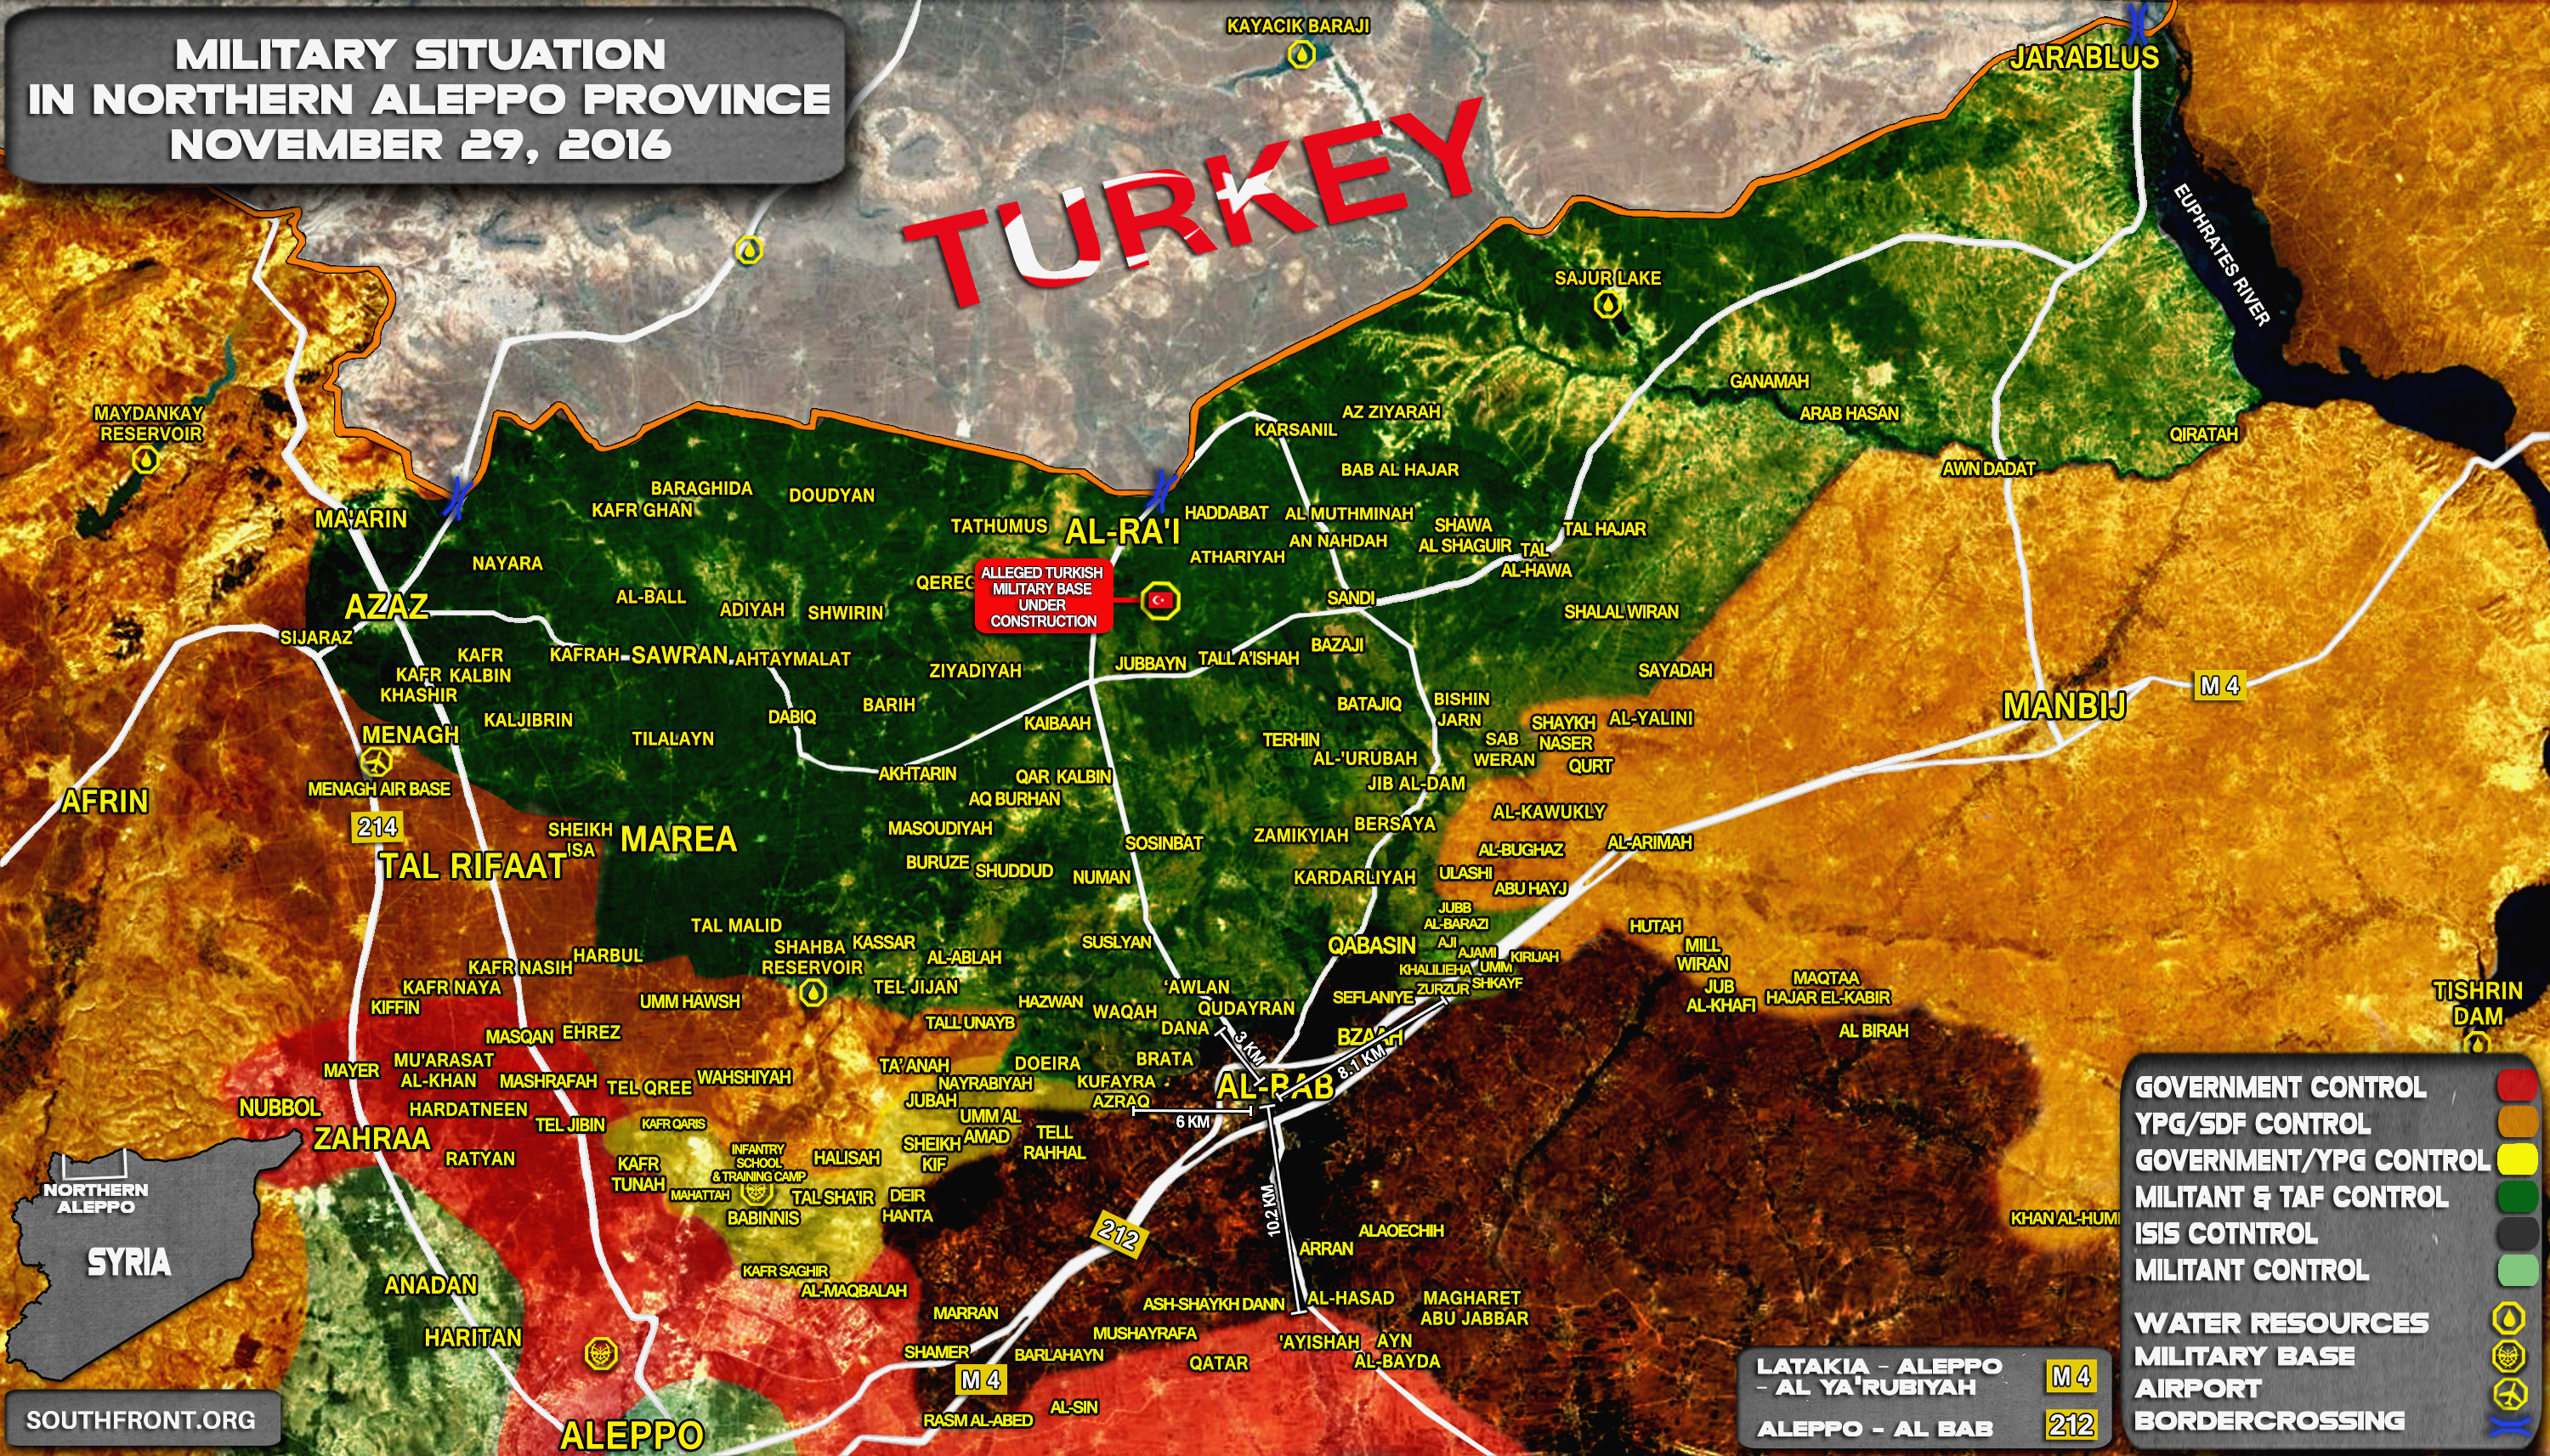 Syria Map: Military Situation in Northern Part of Aleppo Province on November 29, 2016